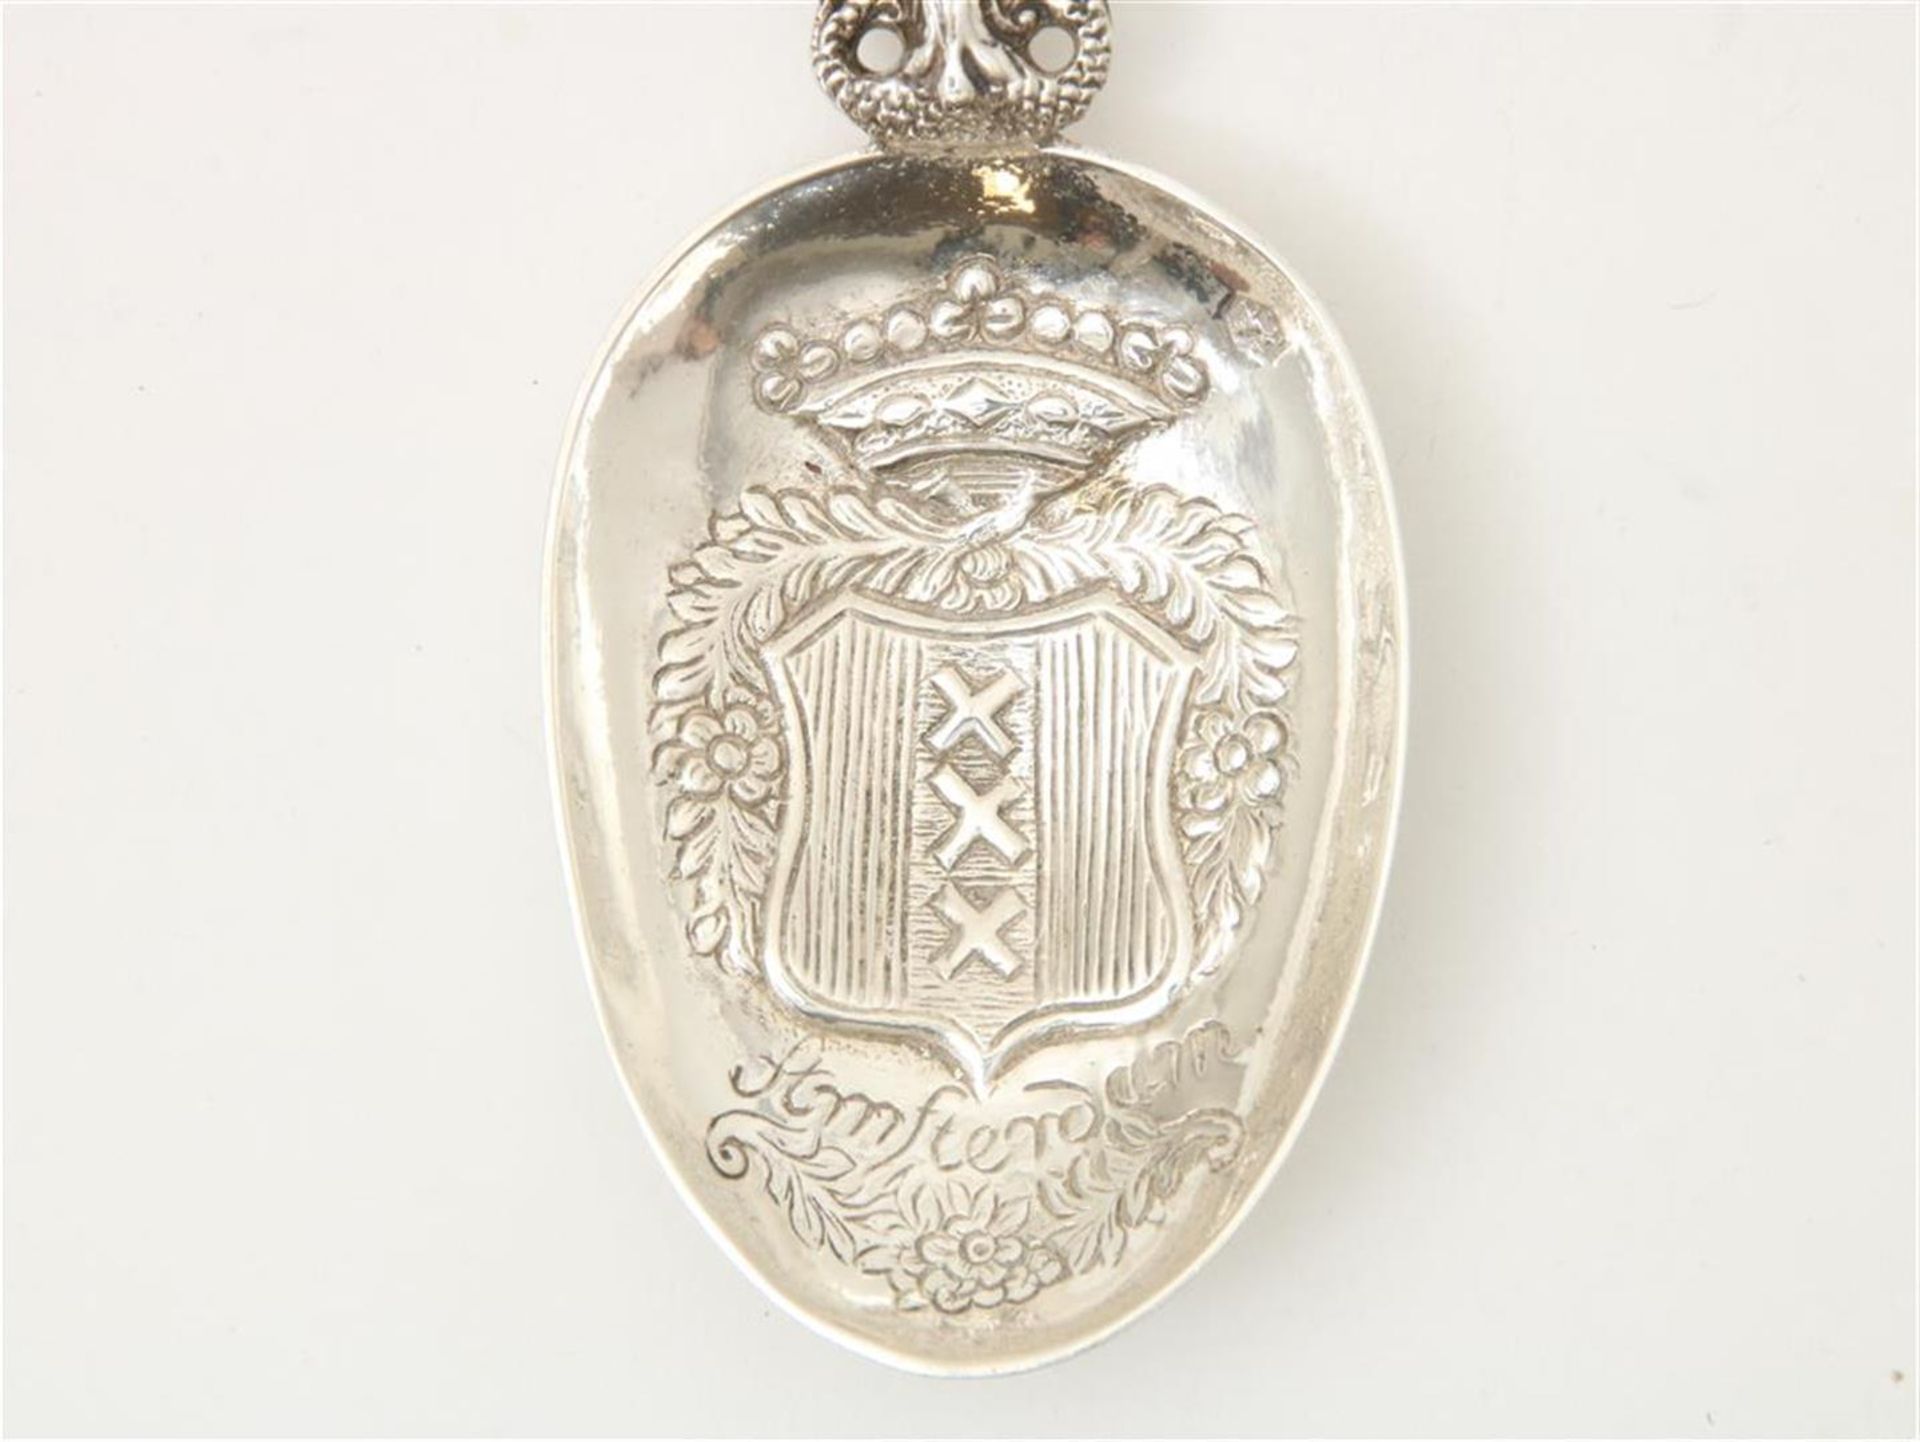 Silver clapper with coat of arms of Amsterdam, grade 835/000, early 20th century, gross weight 59. - Image 2 of 4